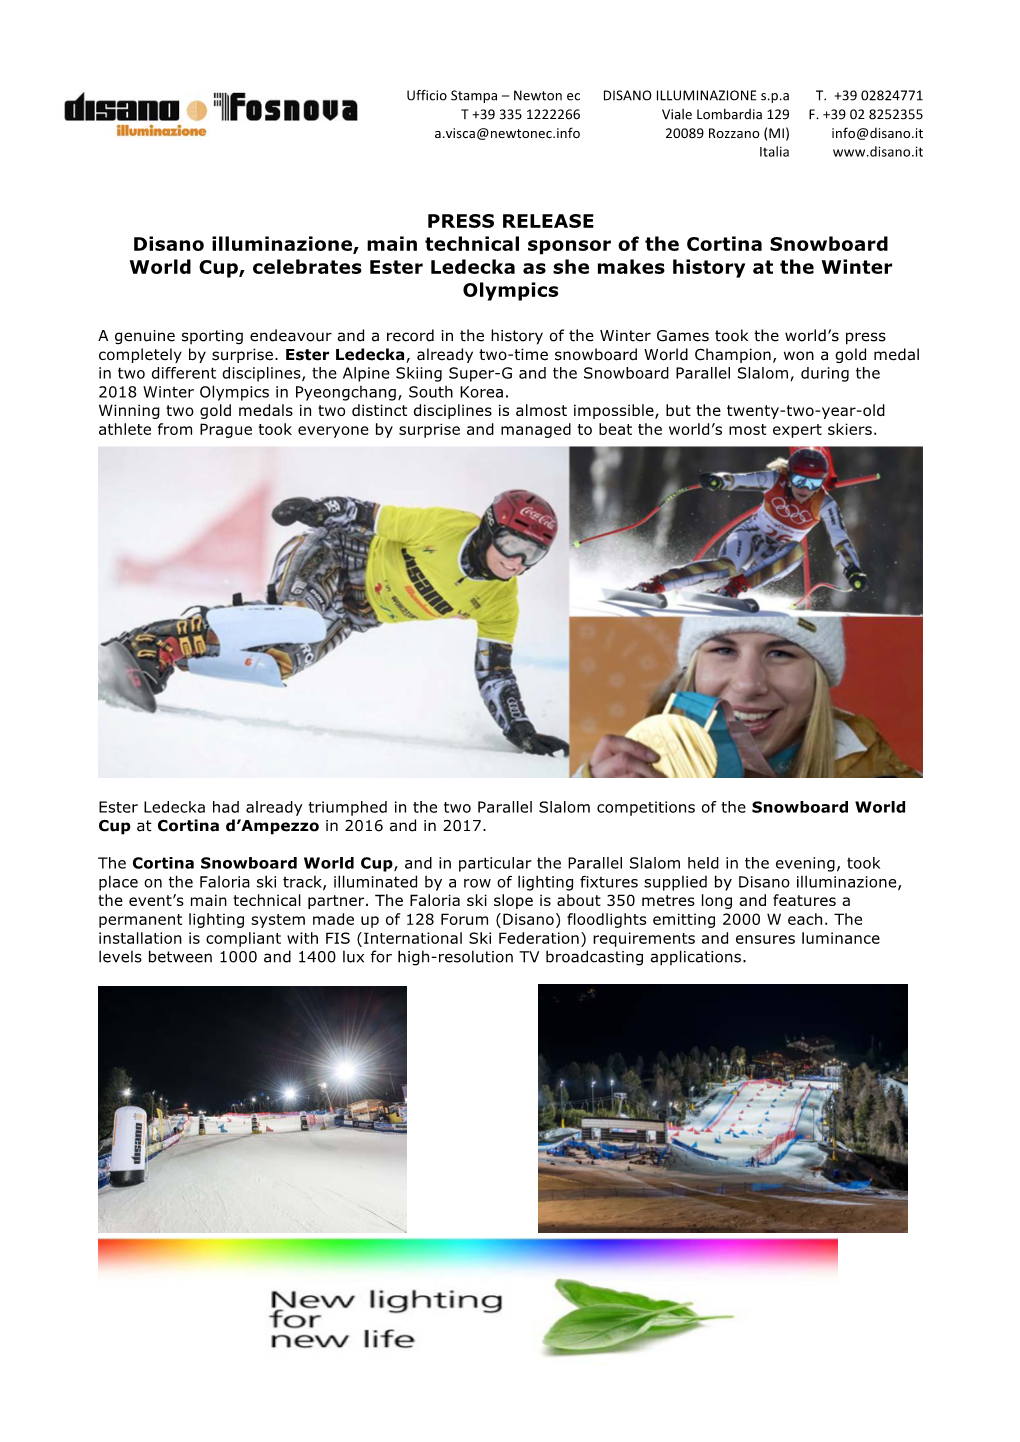 PRESS RELEASE Disano Illuminazione, Main Technical Sponsor of the Cortina Snowboard World Cup, Celebrates Ester Ledecka As She Makes History at the Winter Olympics